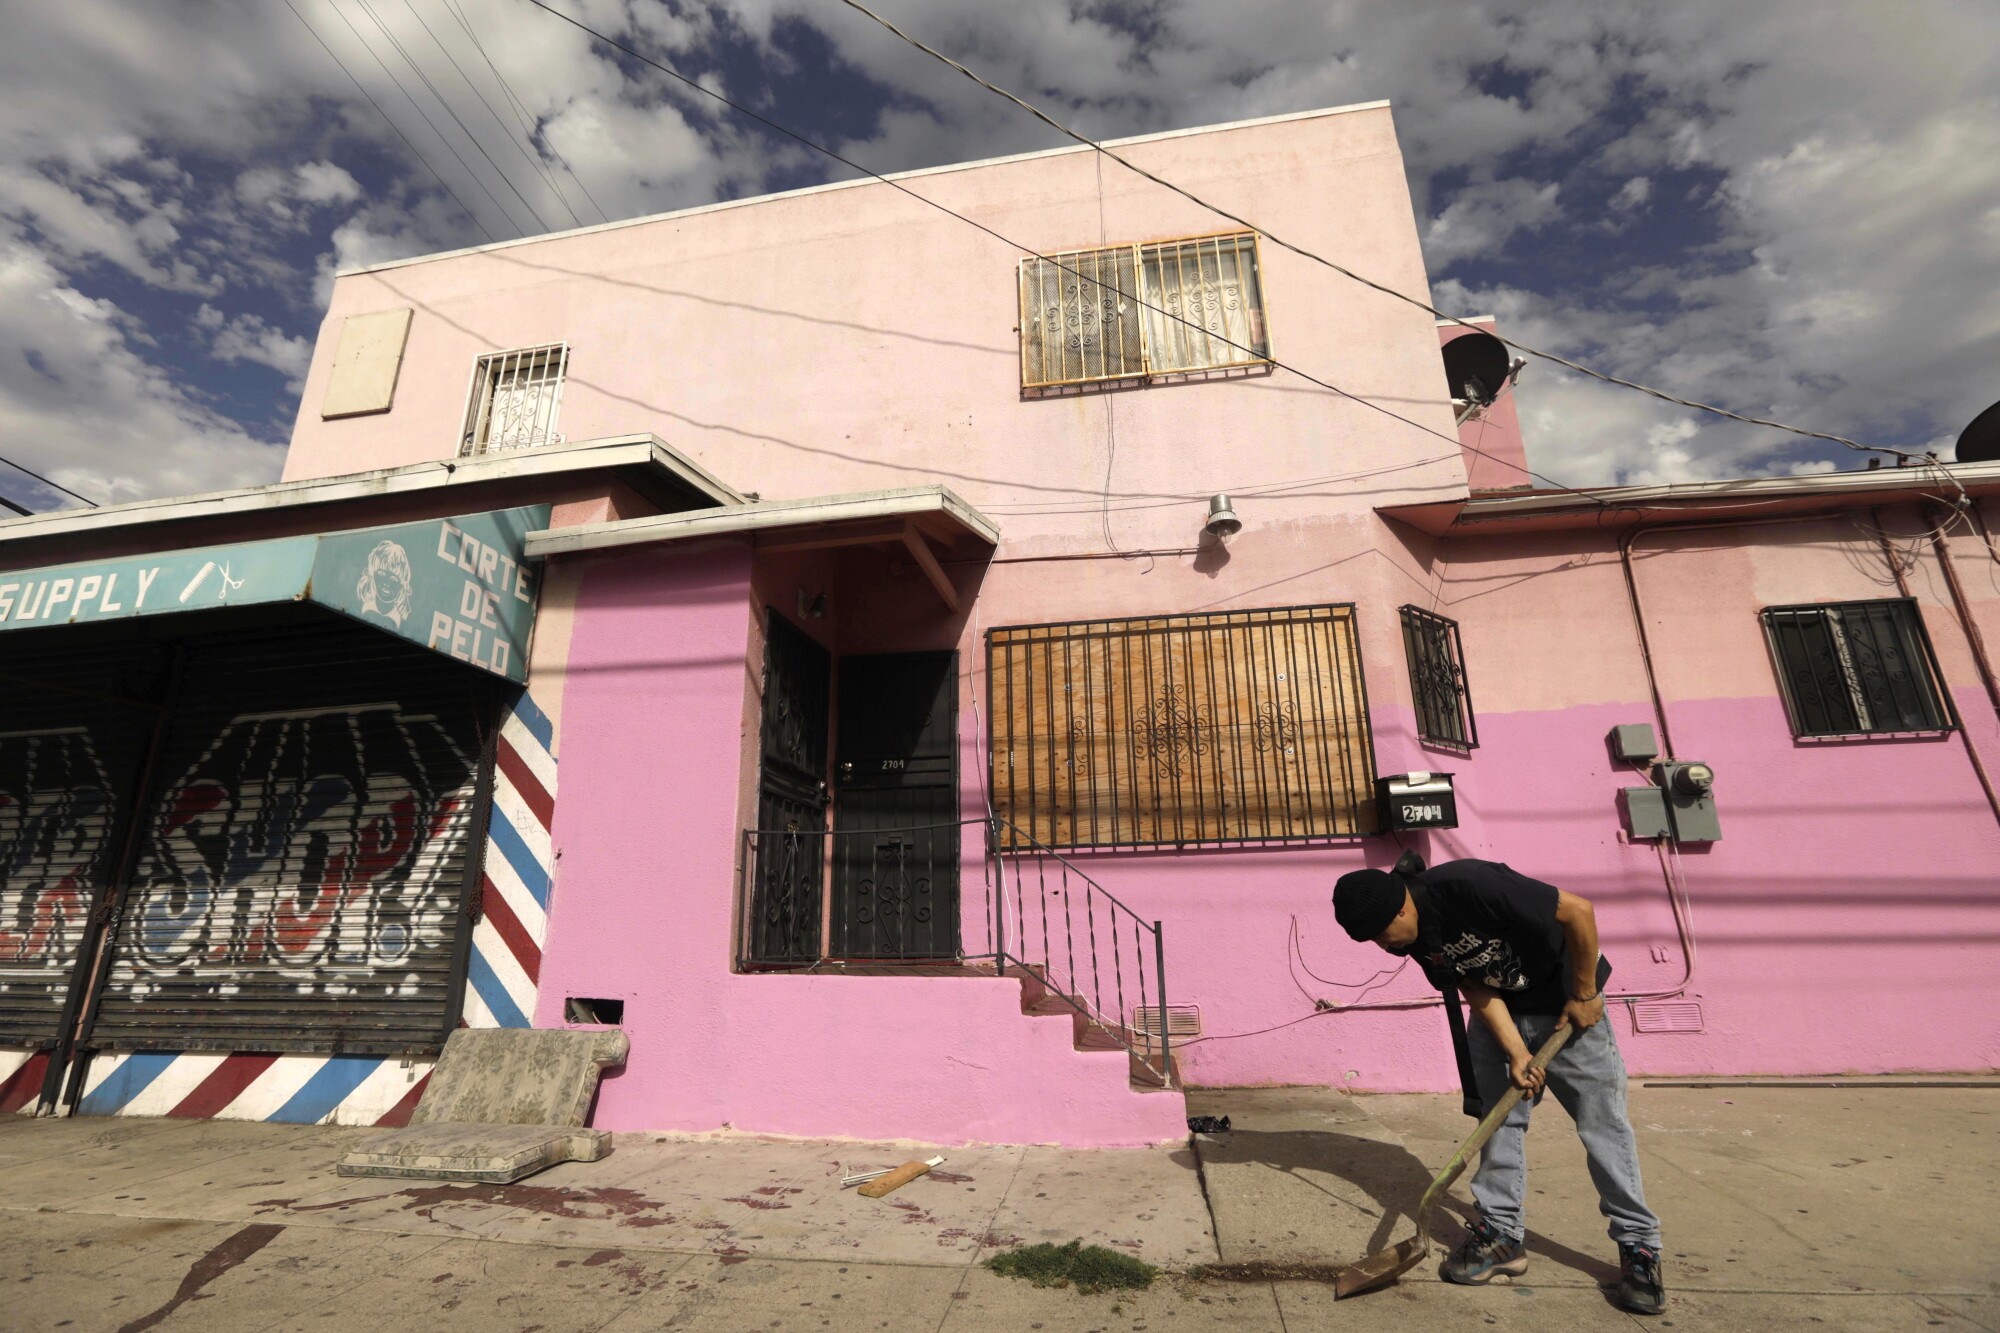 A man cleans the sidewalk in front of a bright pink building